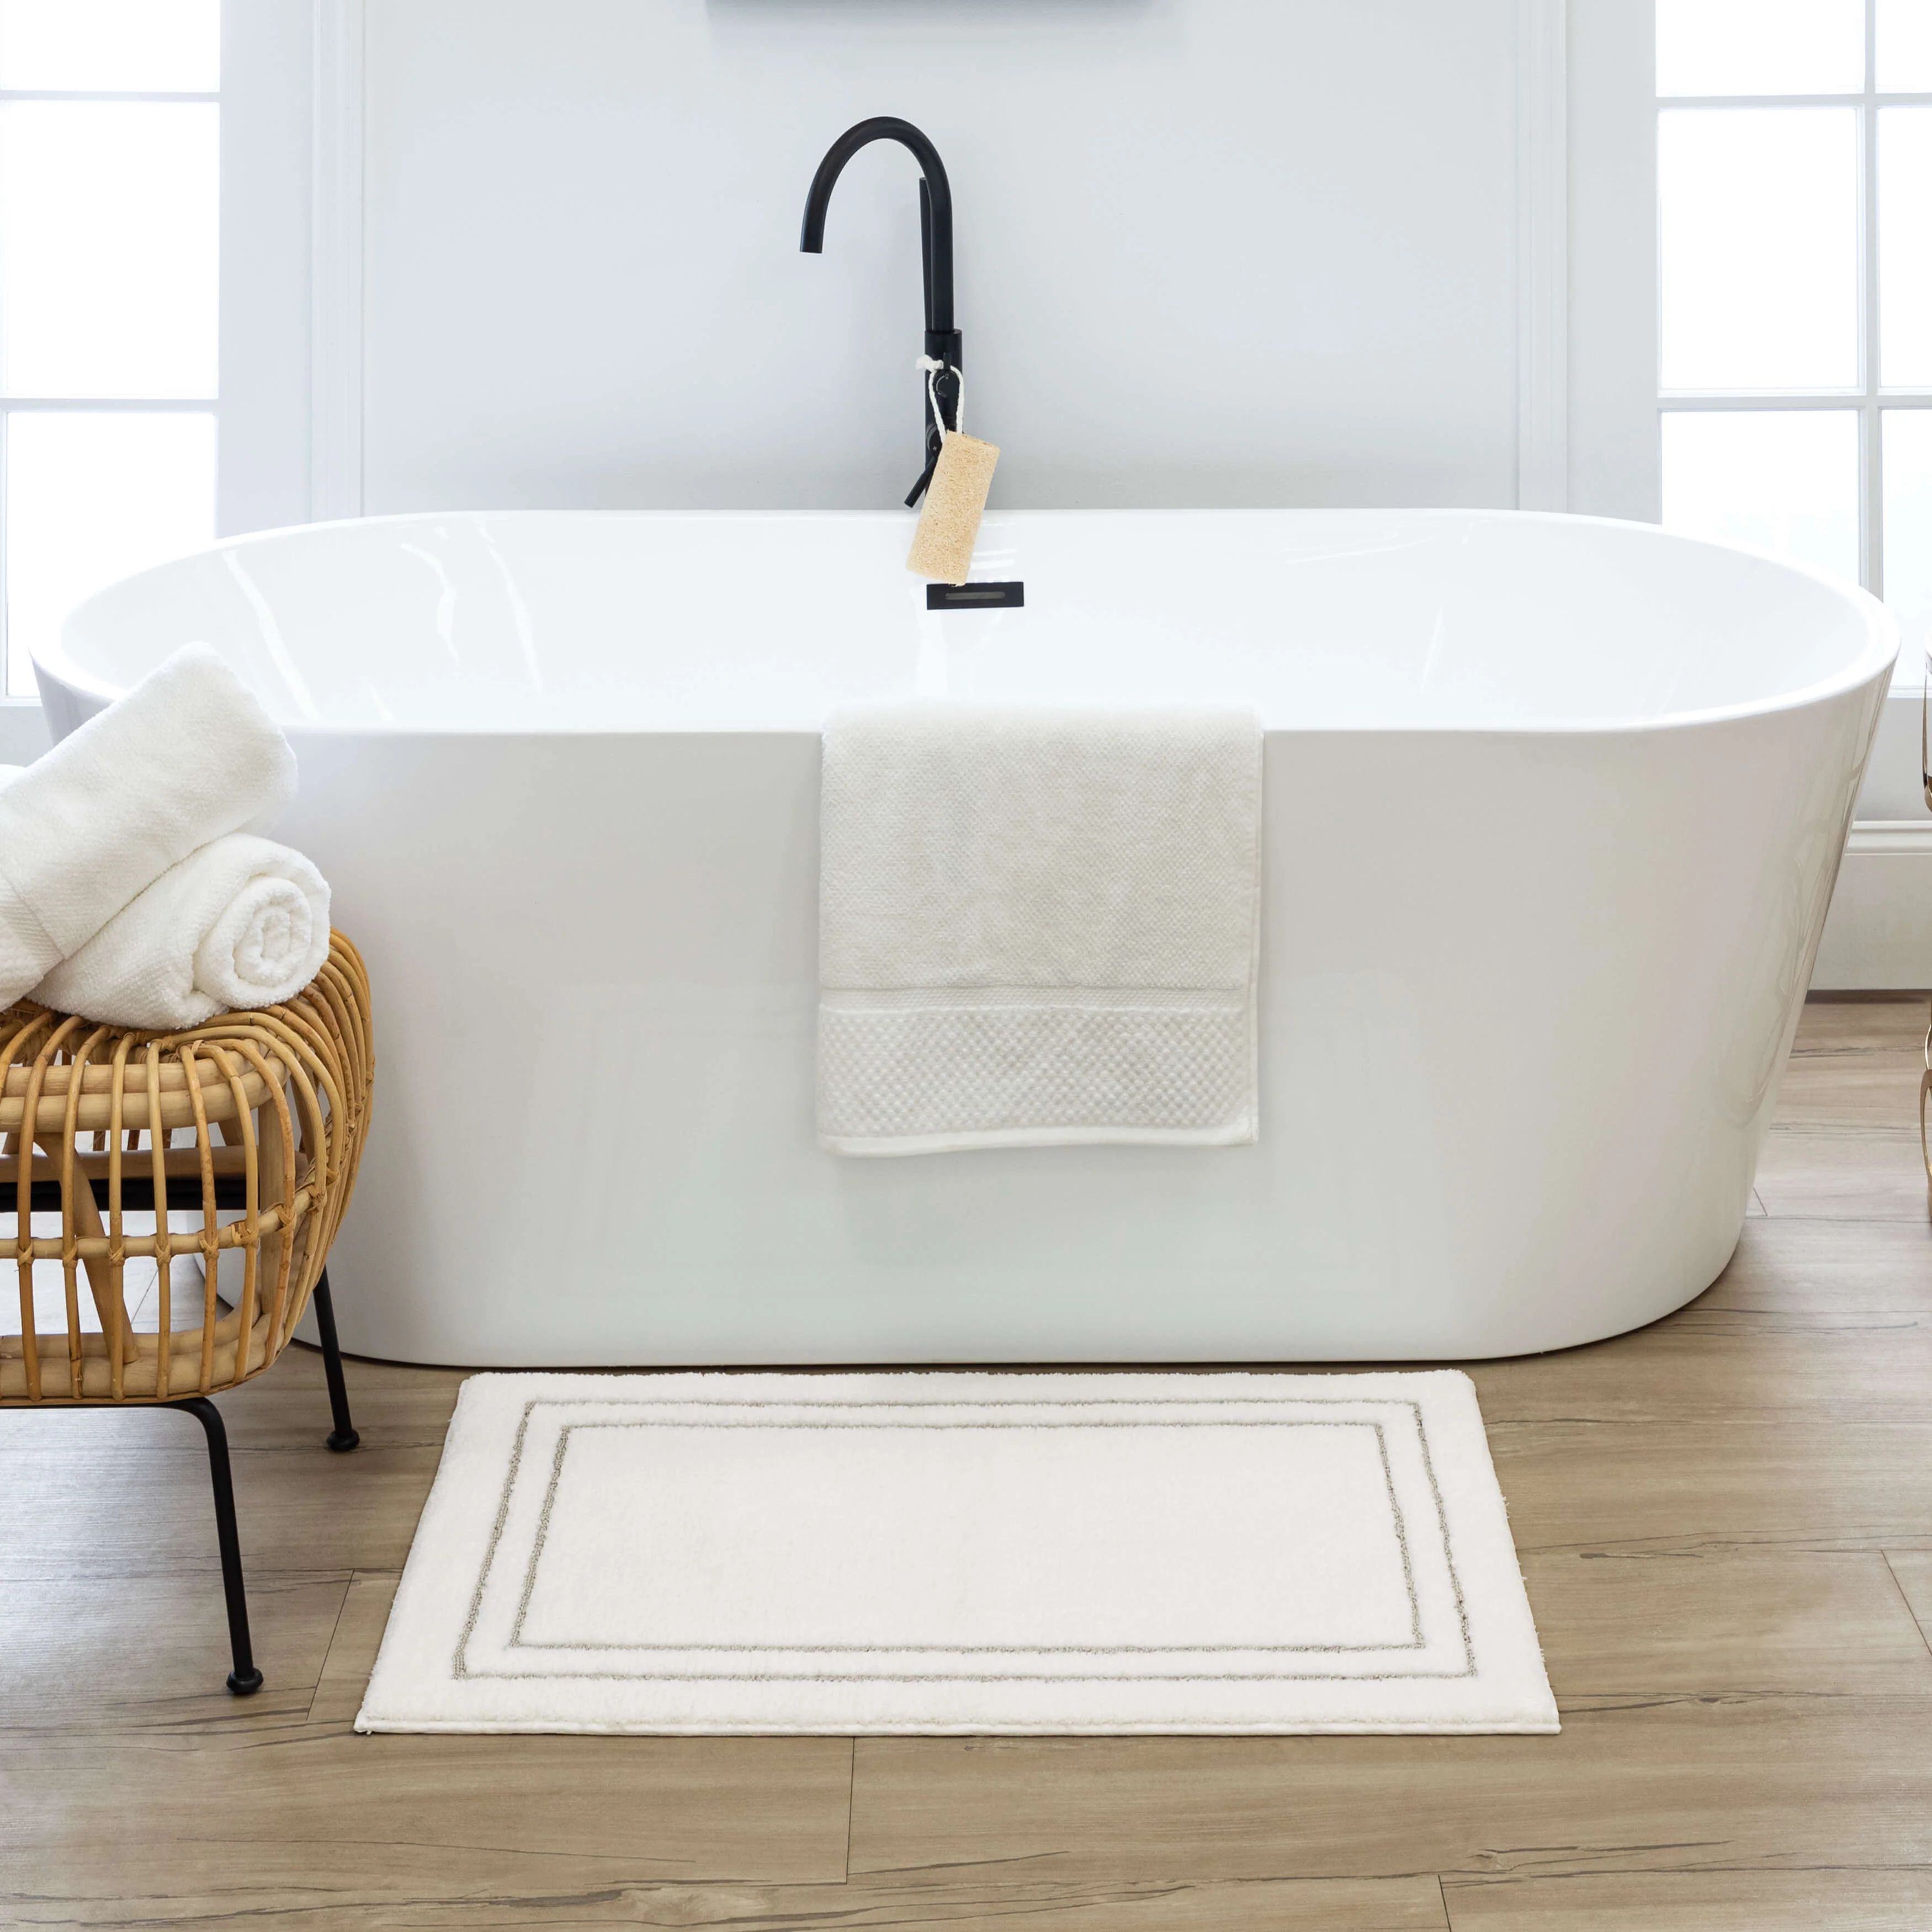 Carrina White and Flint Bath Mat | Covered By Rugs